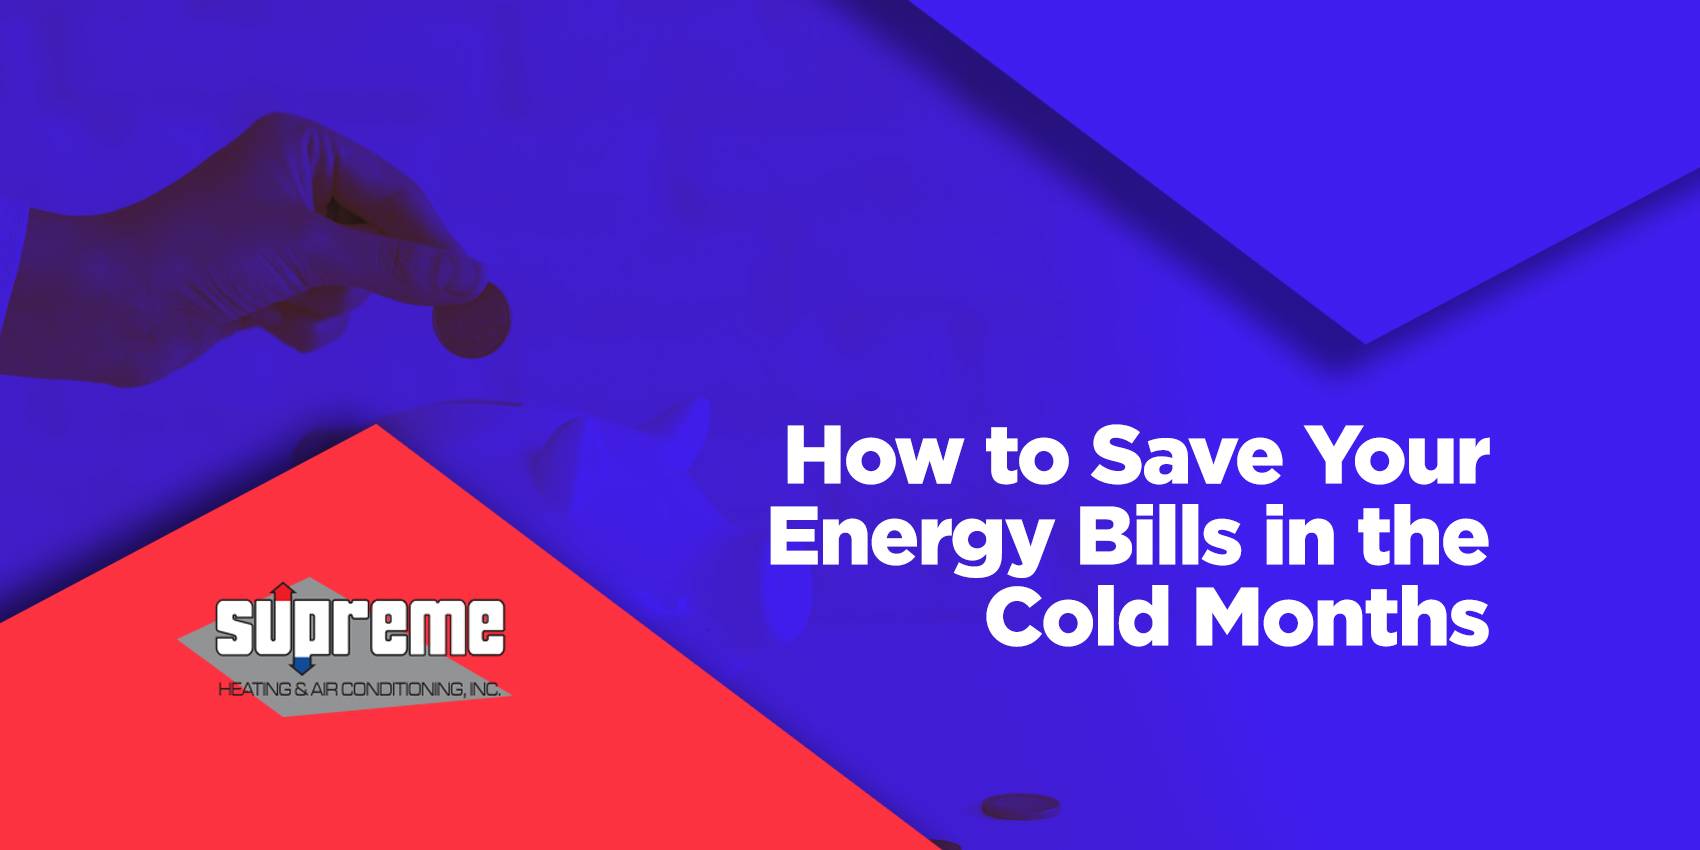 How to Save Your Energy Bills in the Cold Months